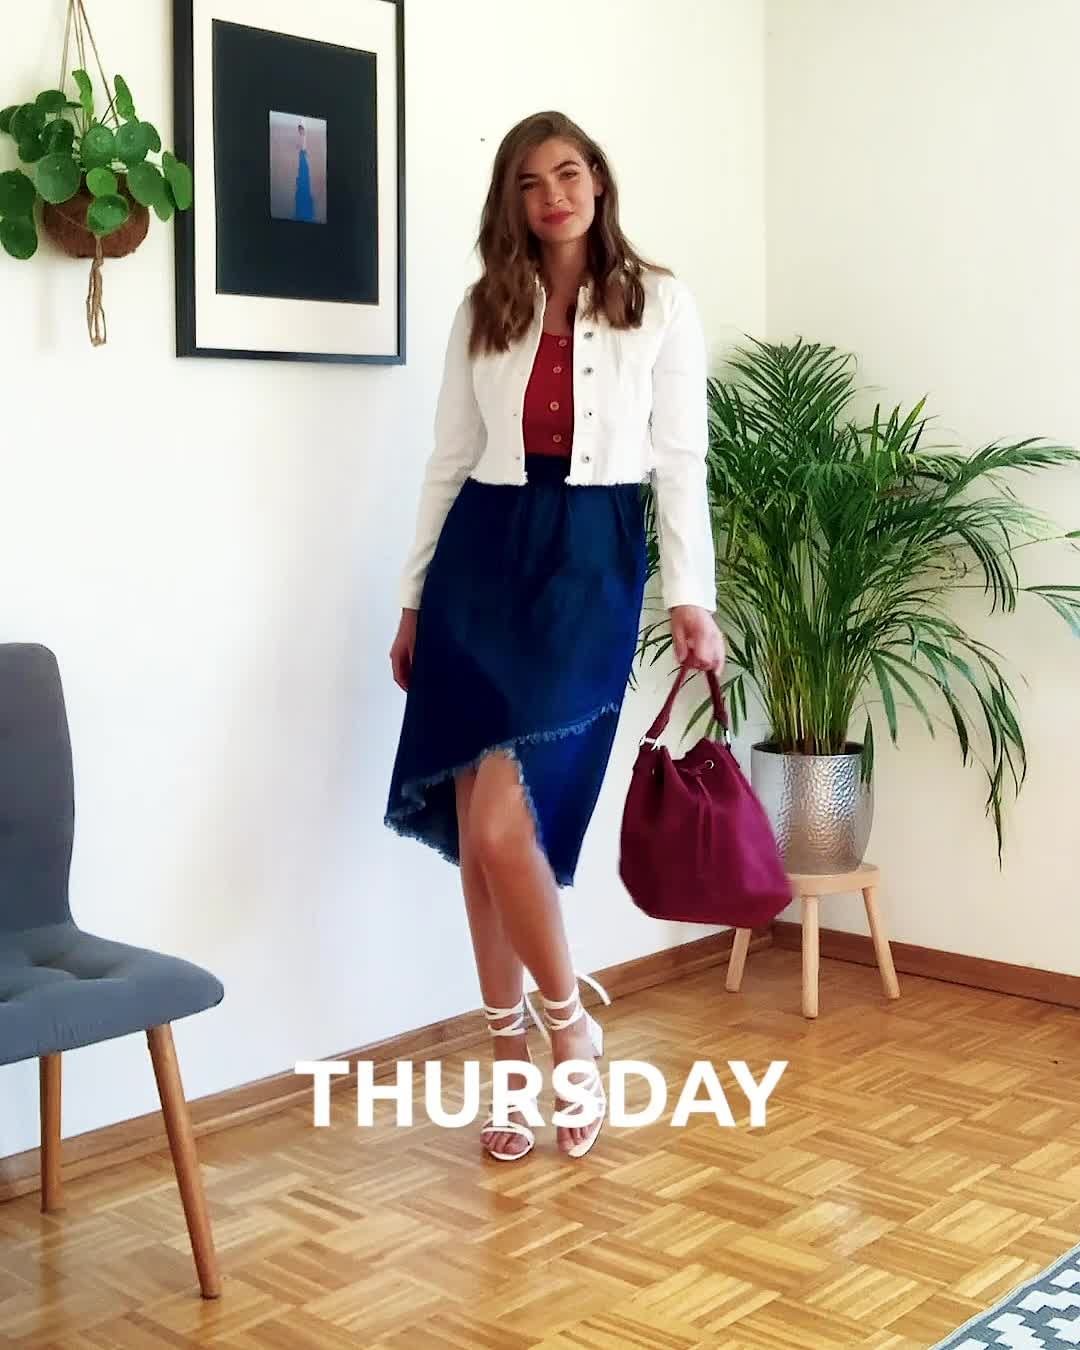 bonprix - 7 Days, 7 Outfits. What's your favourite OOTD?

OUTFIT 1: 
(white dress) 918434, (jacket) 955405, (shoes) 945859, (earrings) 924933
OUTFIT 2: 
(blazer) 979539, (trousers) 979553, (shirt) 936...